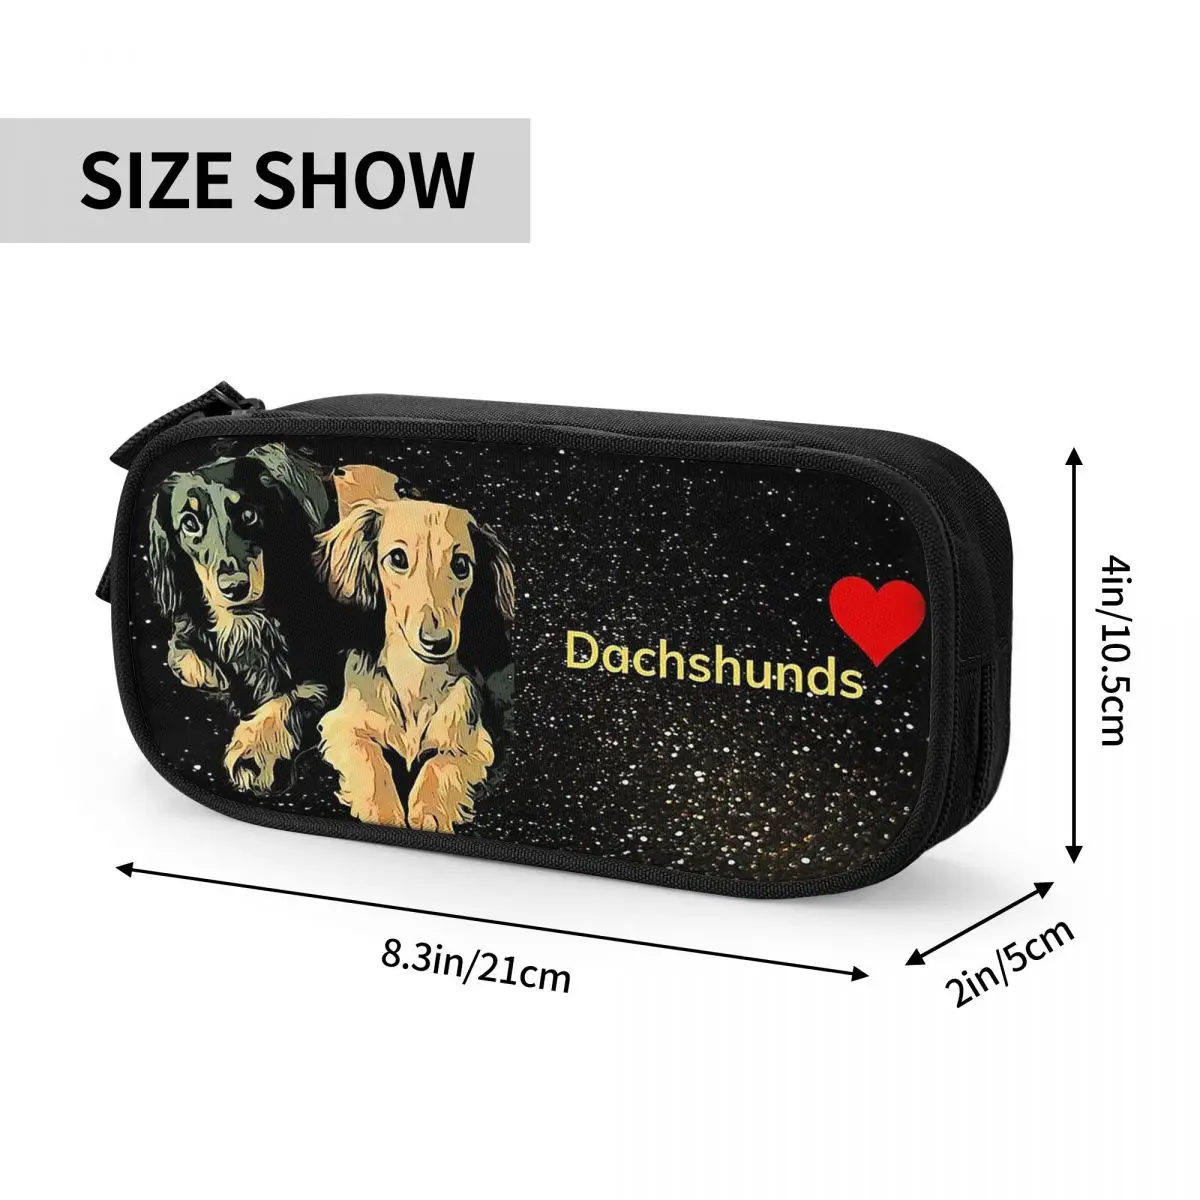 Dachshund Doxie Pencil Case Wiener Sausage Dog Lover Pencilcases Pen Girls Boys Big Capacity Bag School Supplies Gift Stationery images - 6